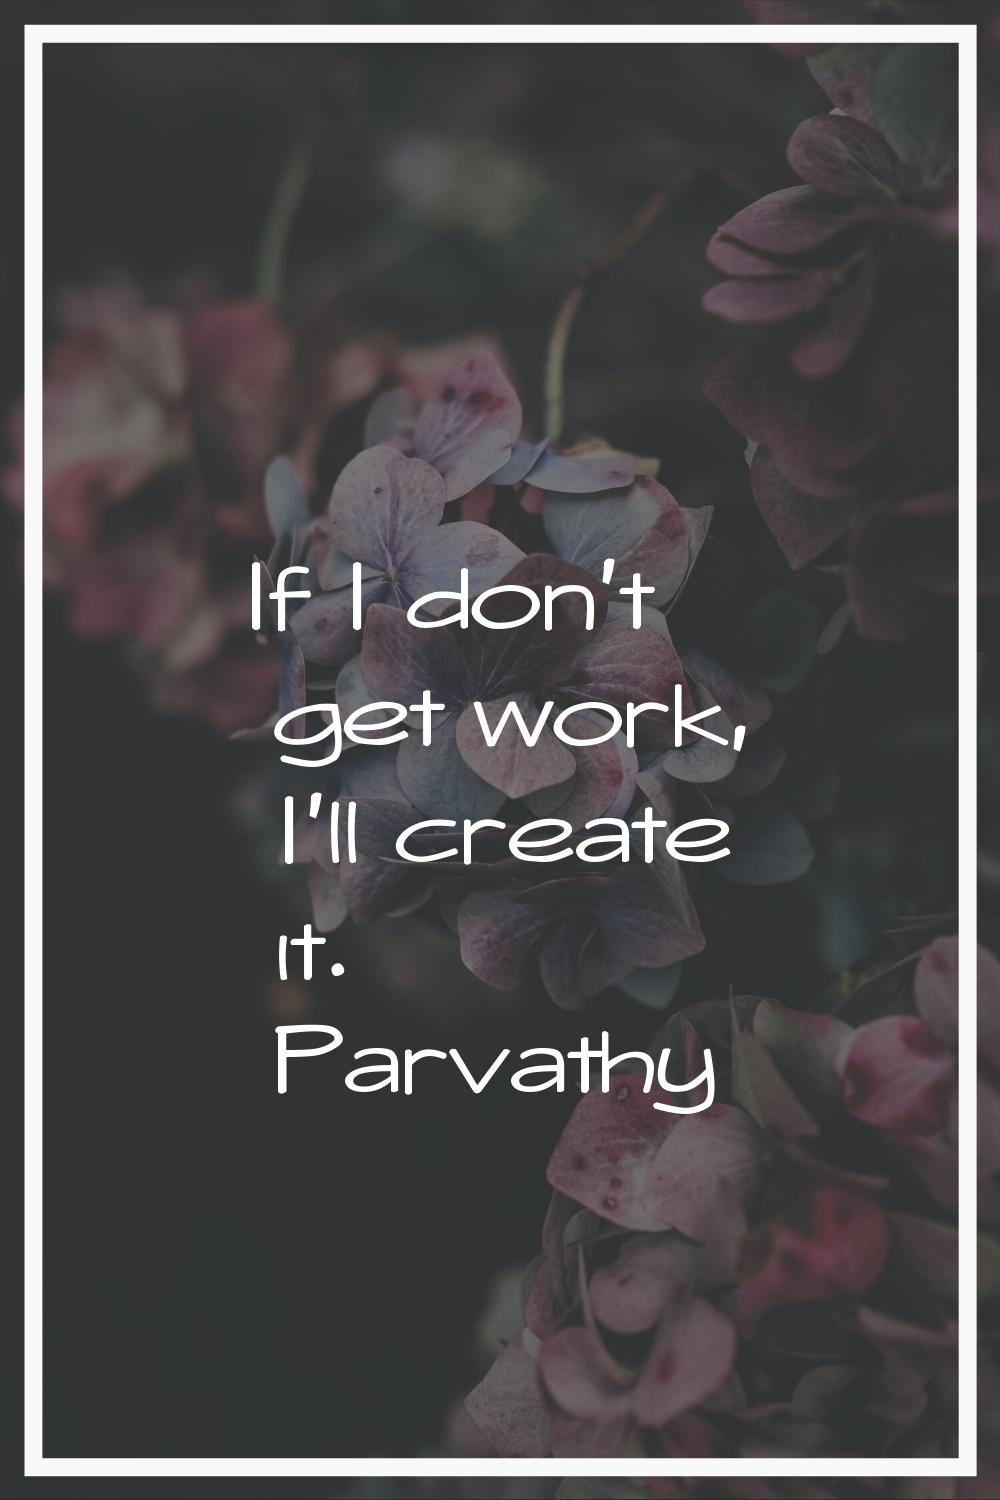 If I don't get work, I'll create it.